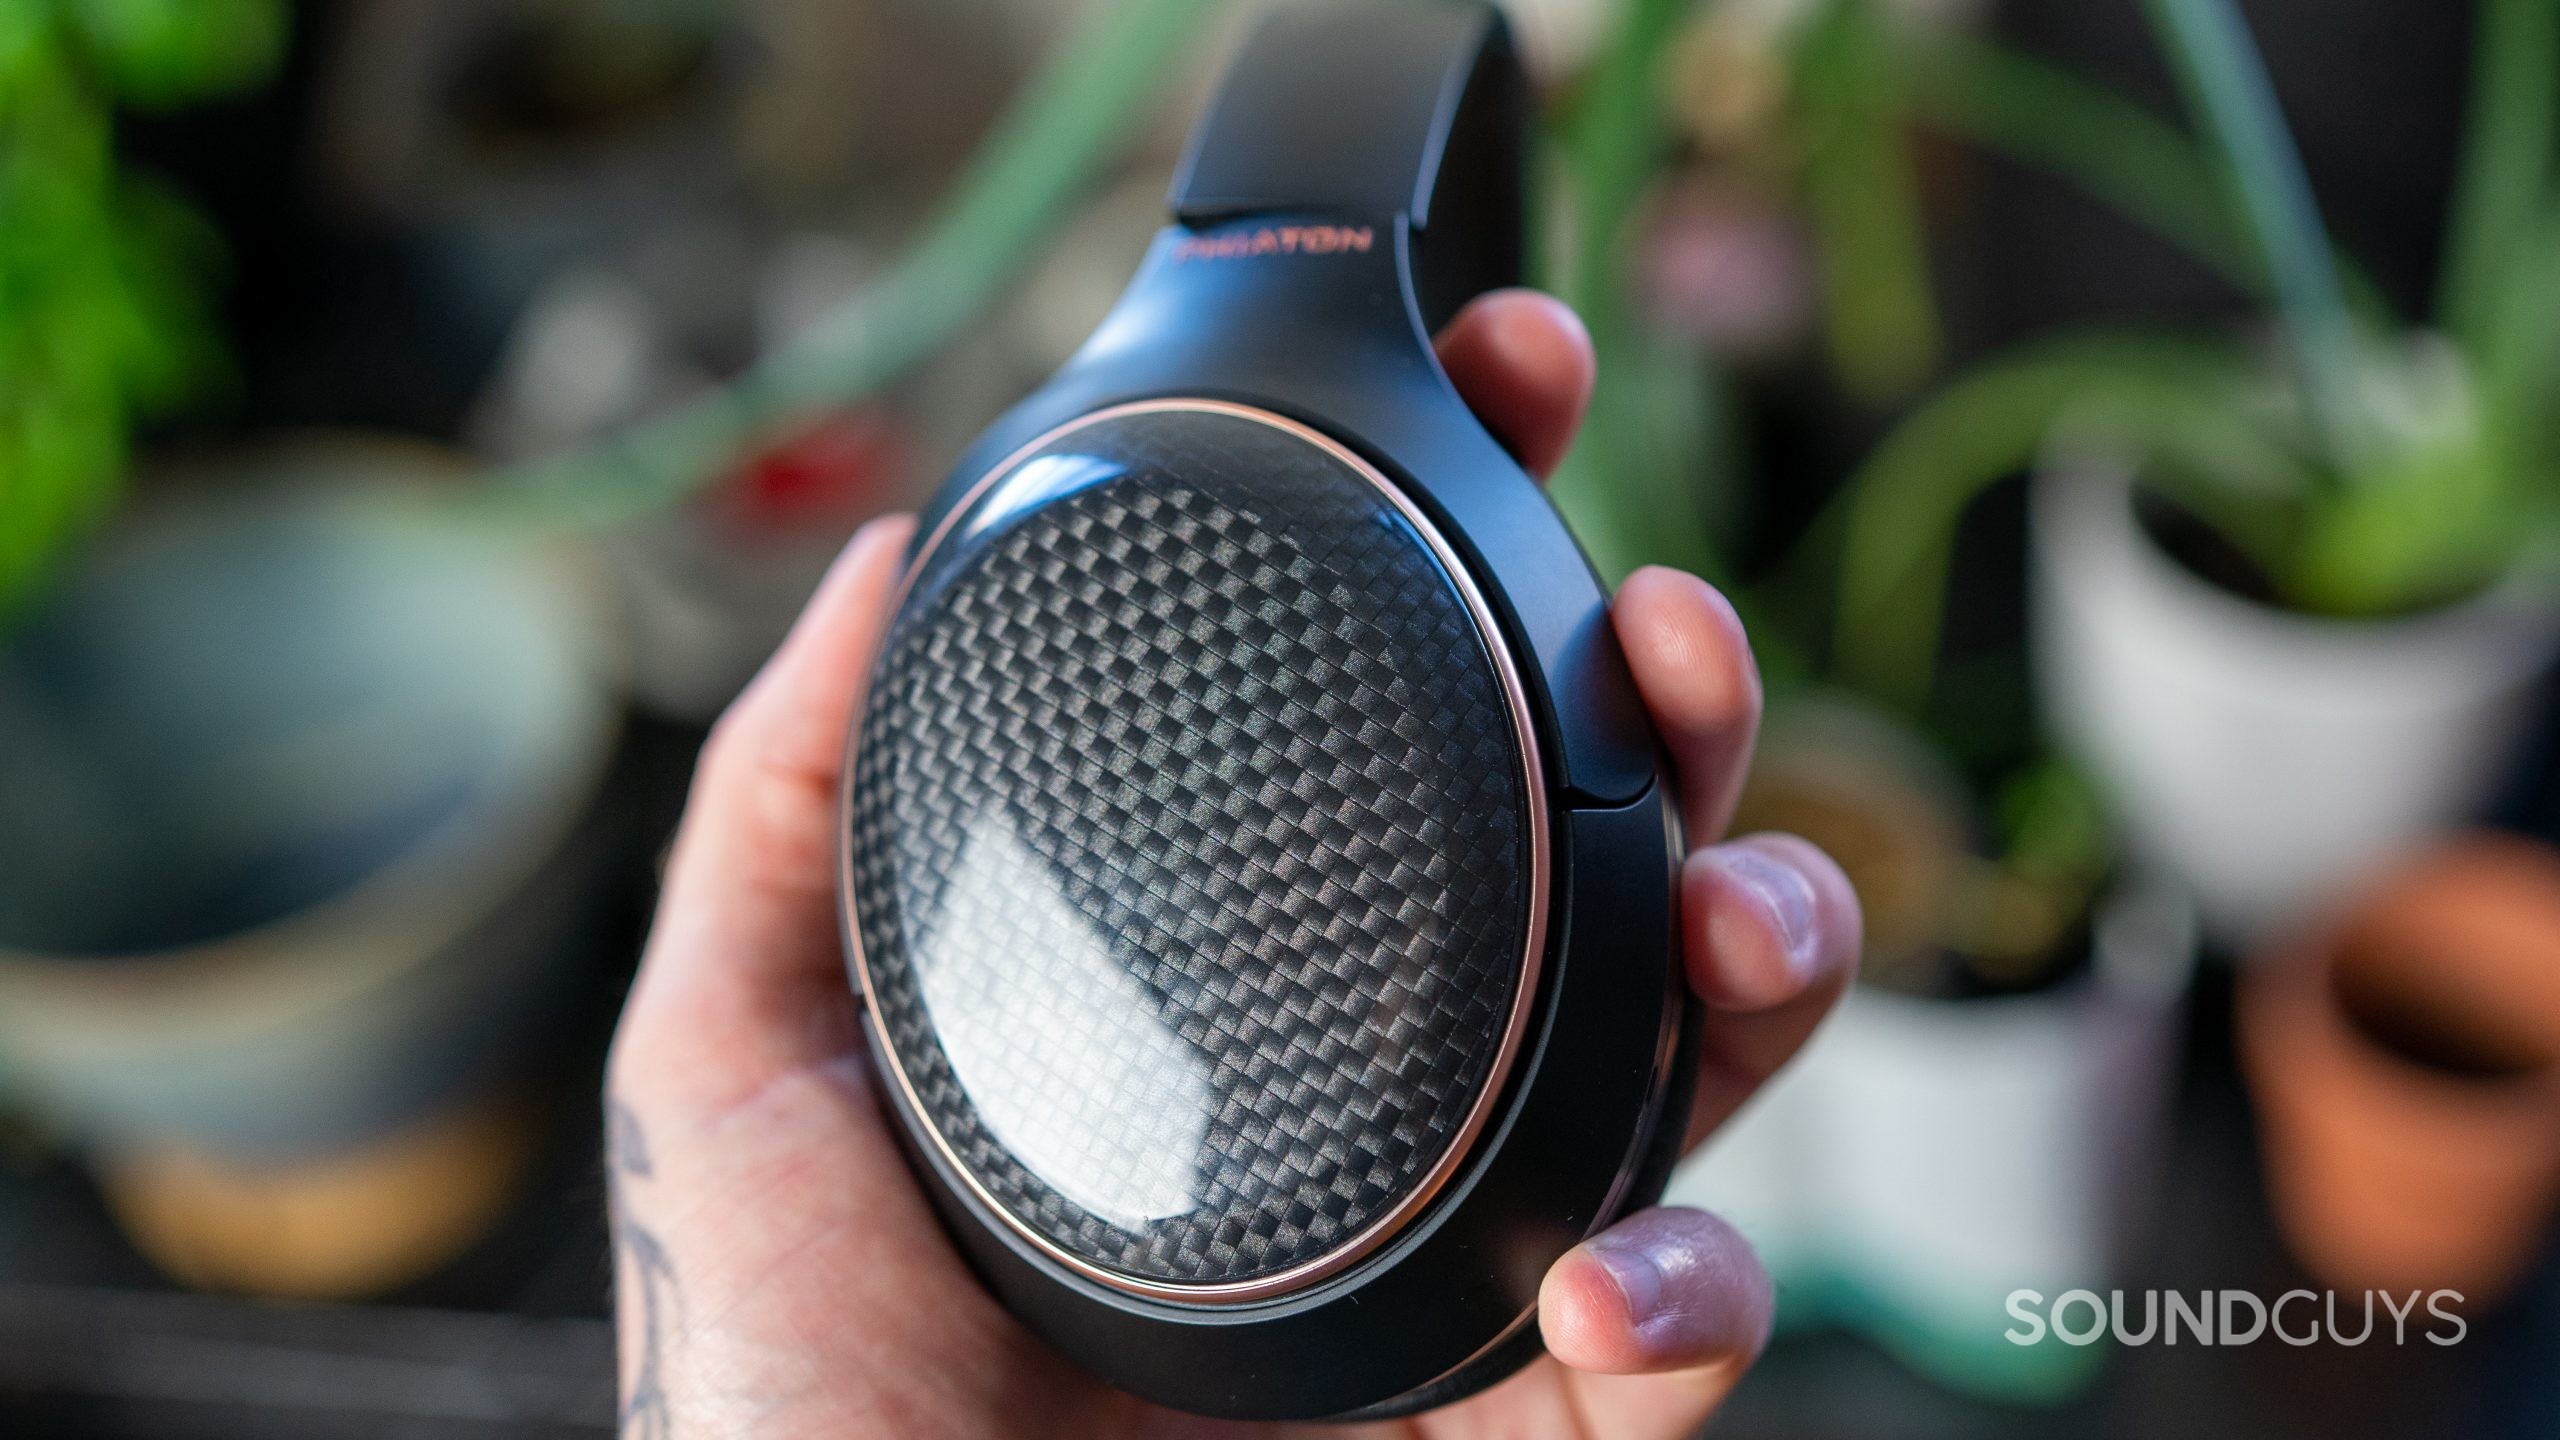 A man holds the Phiaton 900 Legacy headphones in hand in front of plants.